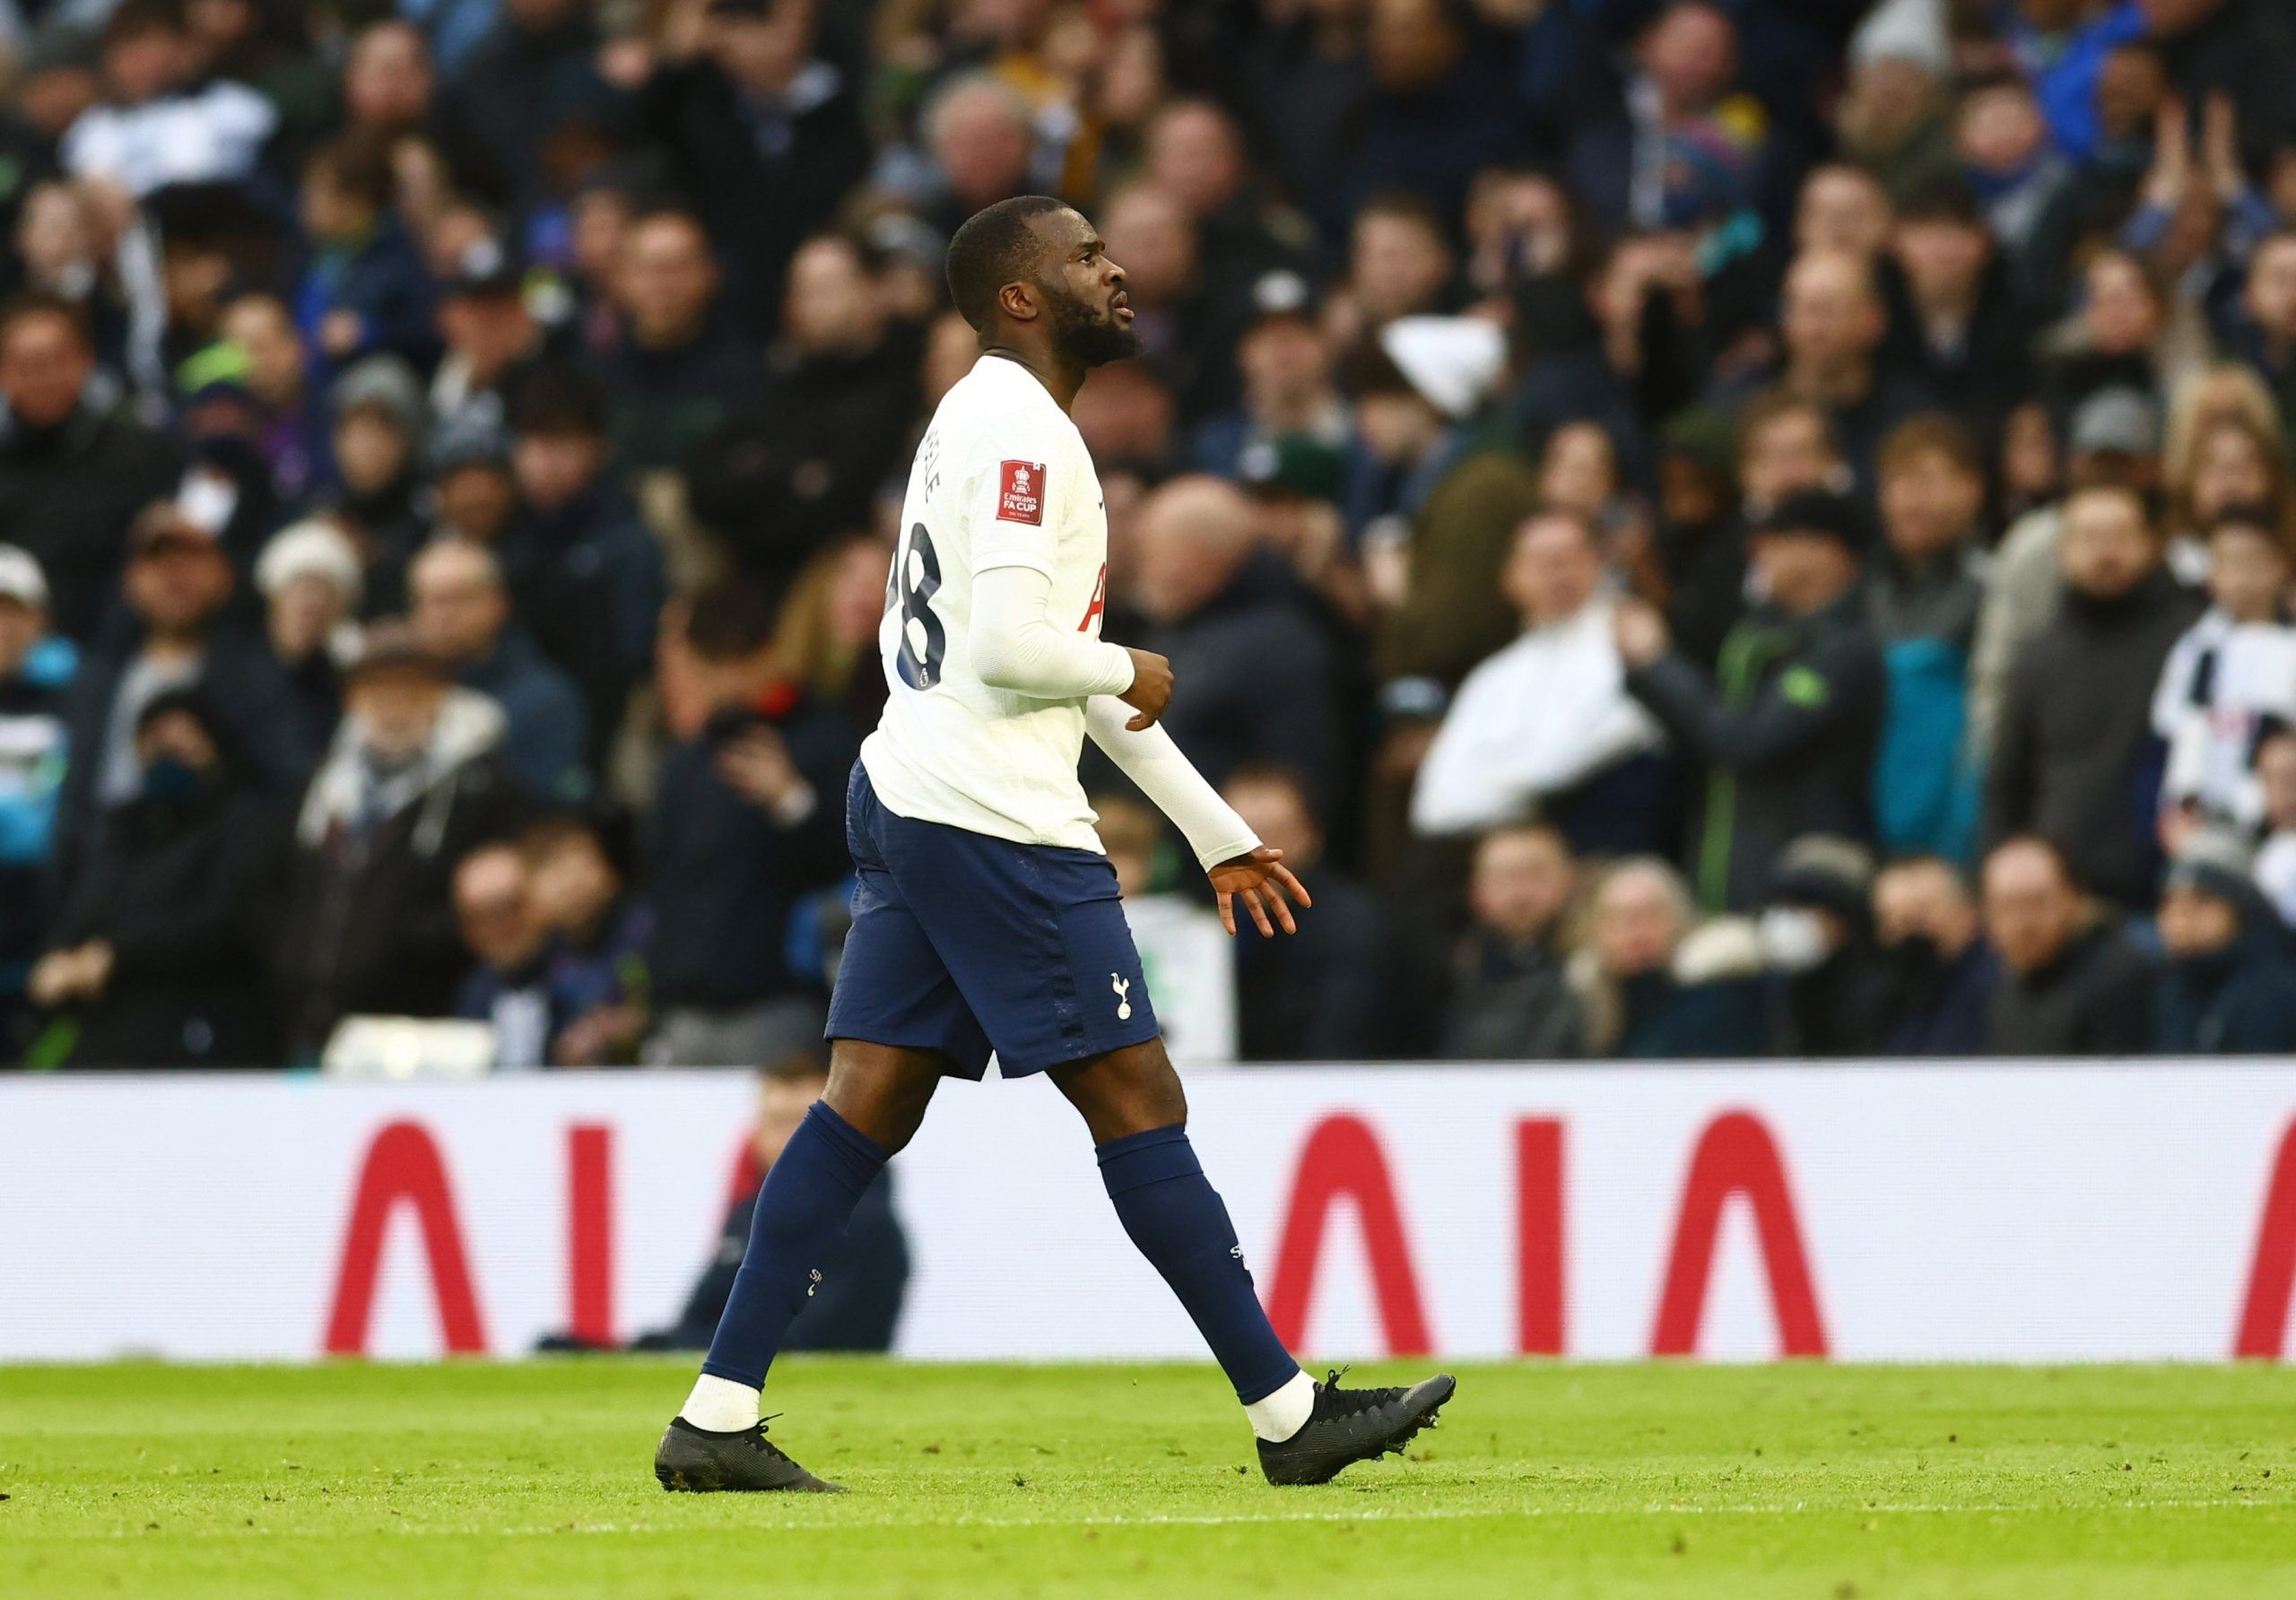 Soccer Football - FA Cup Third Round - Tottenham Hotspur v Morecambe - Tottenham Hotspur Stadium, London, Britain - January 9, 2022 Tottenham Hotspur's Tanguy Ndombele walks off the pitch after being substituted REUTERS/David Klein